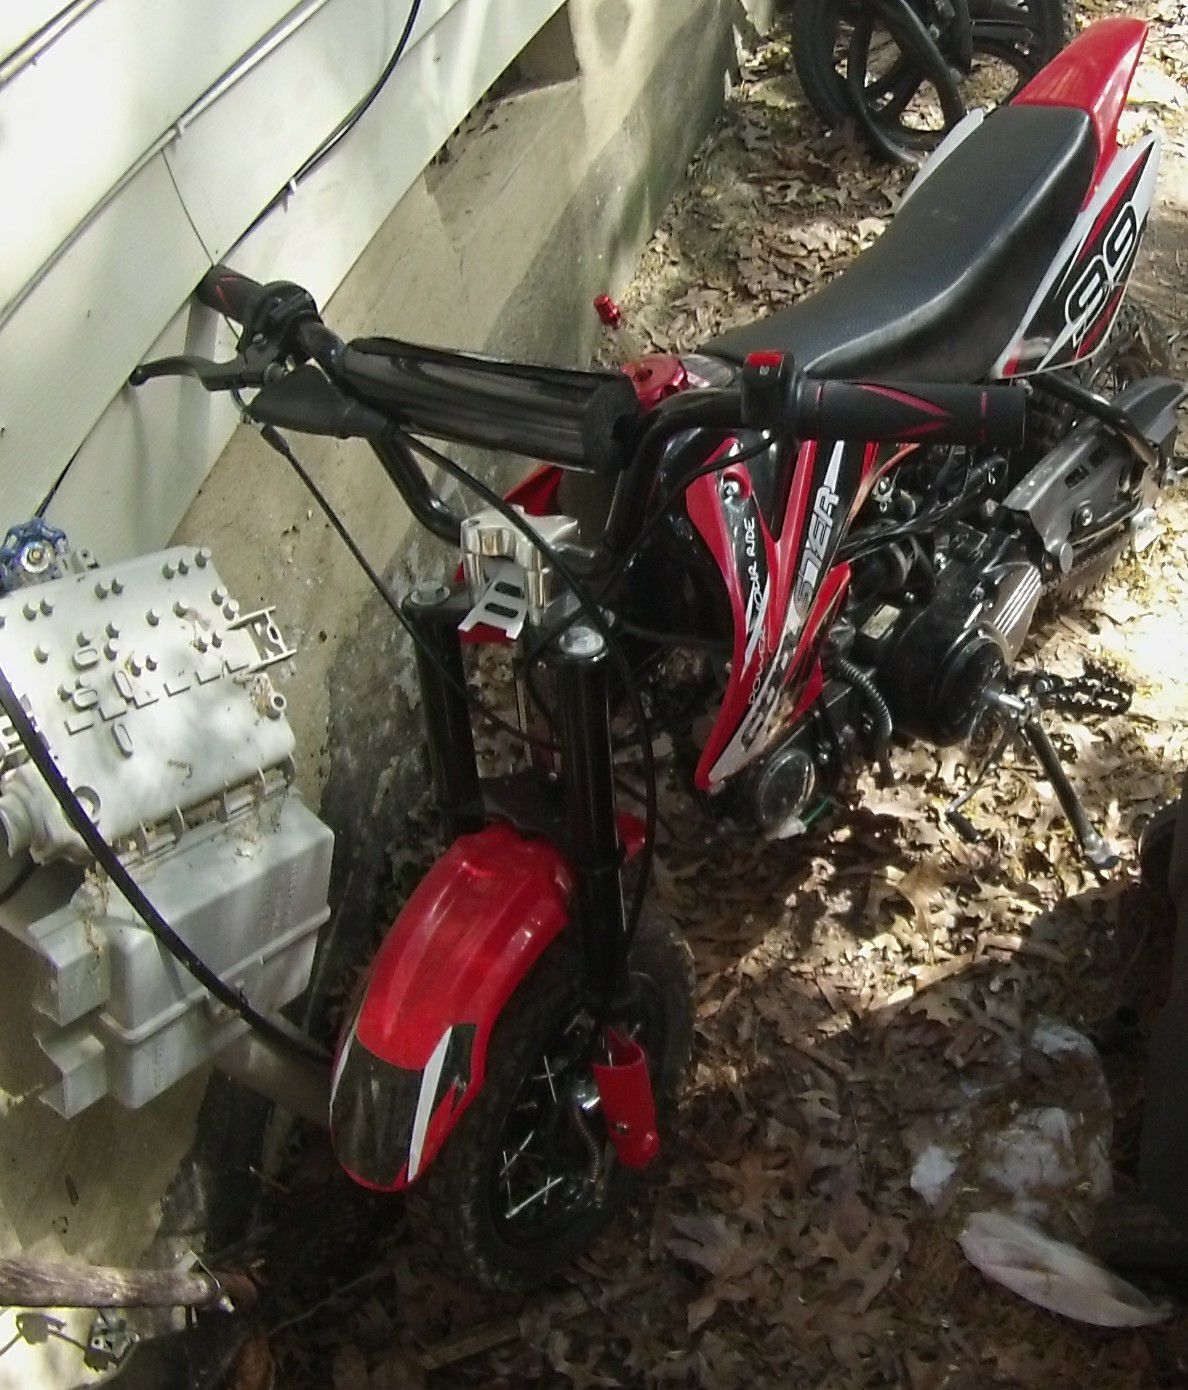 70cc coolster dirtbike